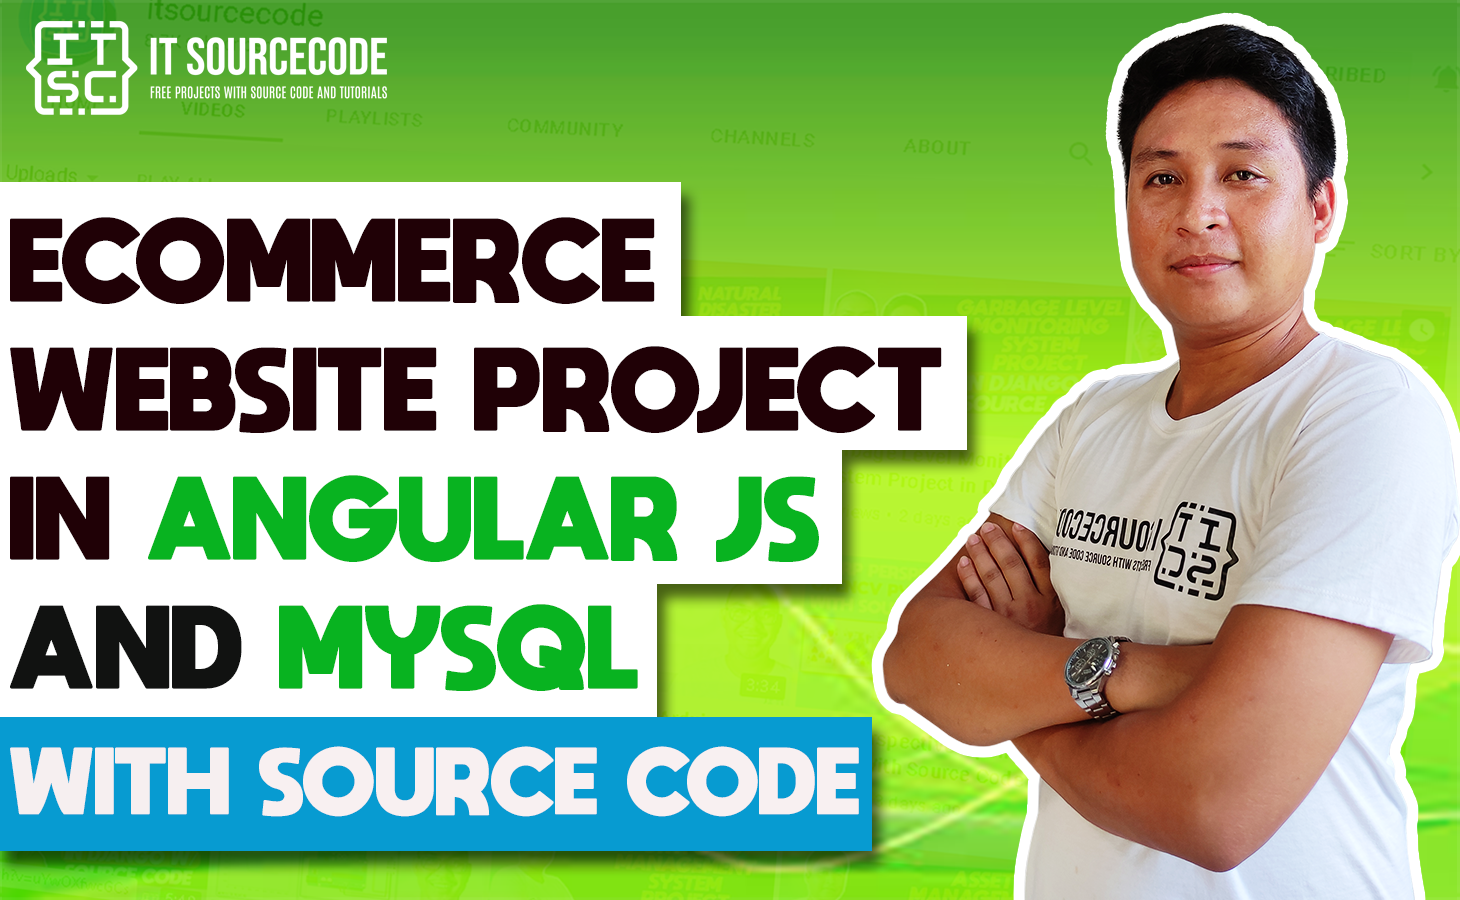 Ecommerce Website Project in Angular JS and MySQL with Source Code